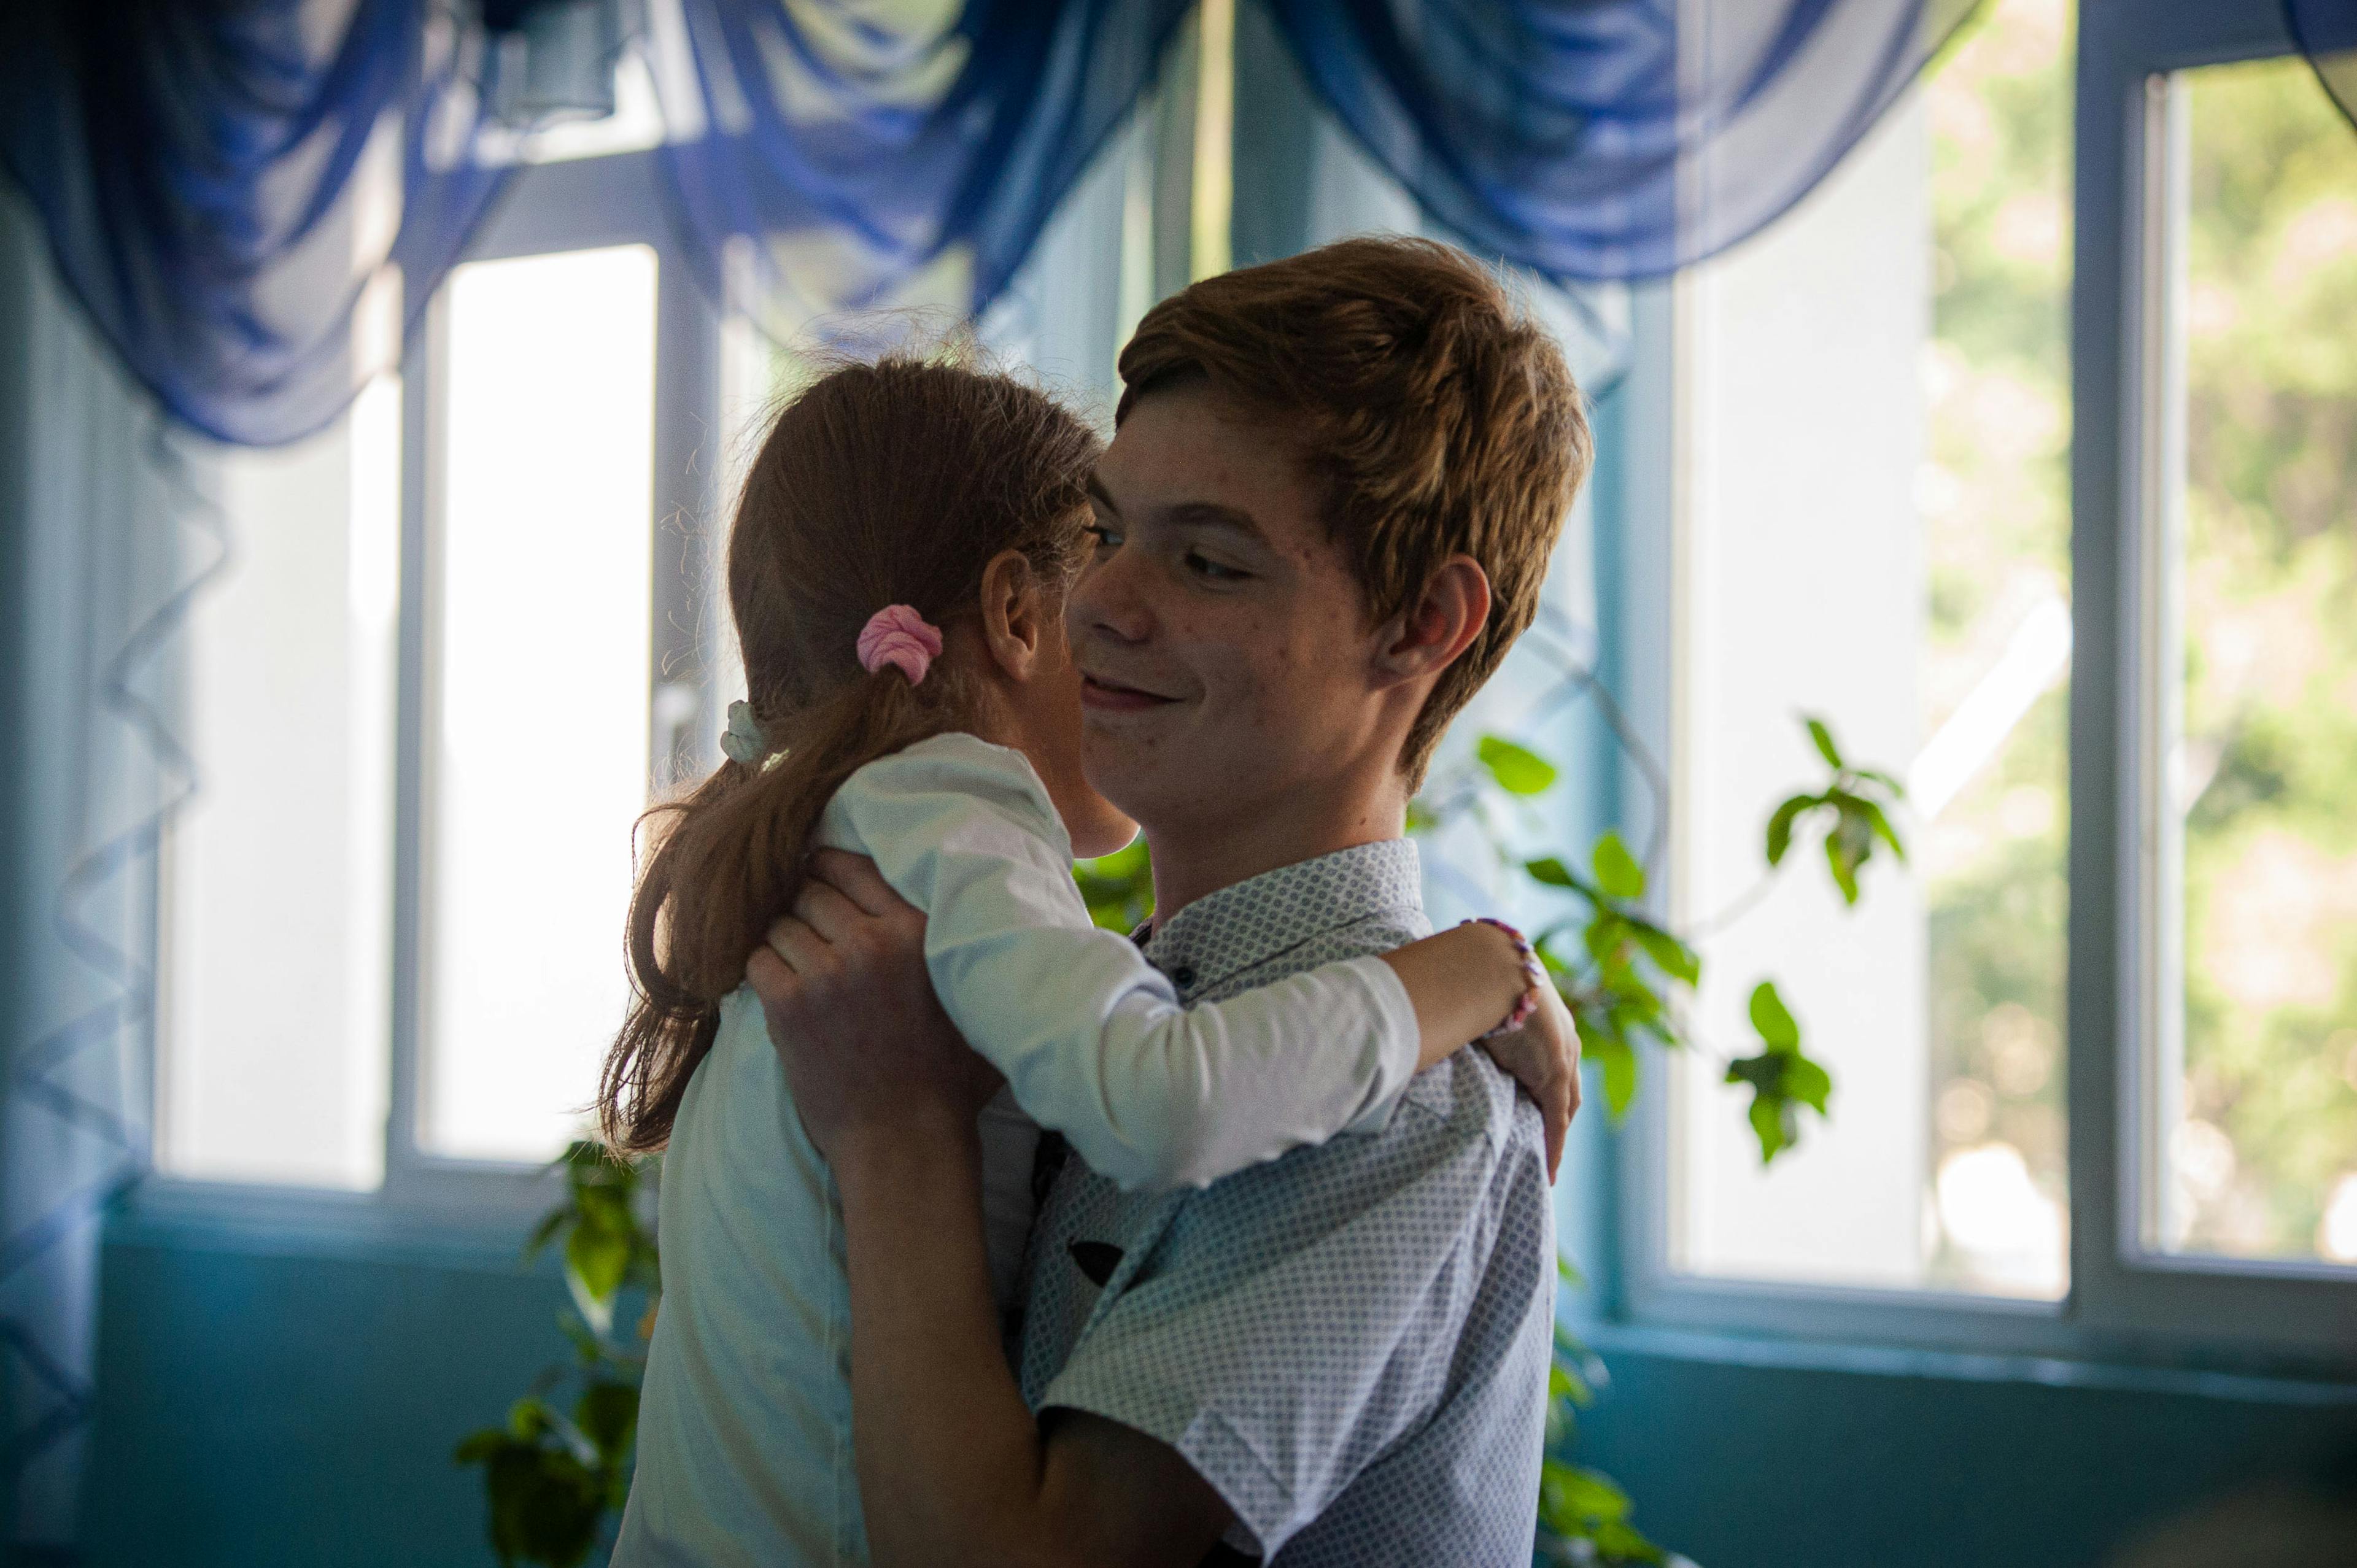 14-year-old Vanea hugs his 10-year-old sister Sasha in the school corridor. The siblings fled Zhytomyr, Ukraine as the fighting intensified along with their mother and grandmother.